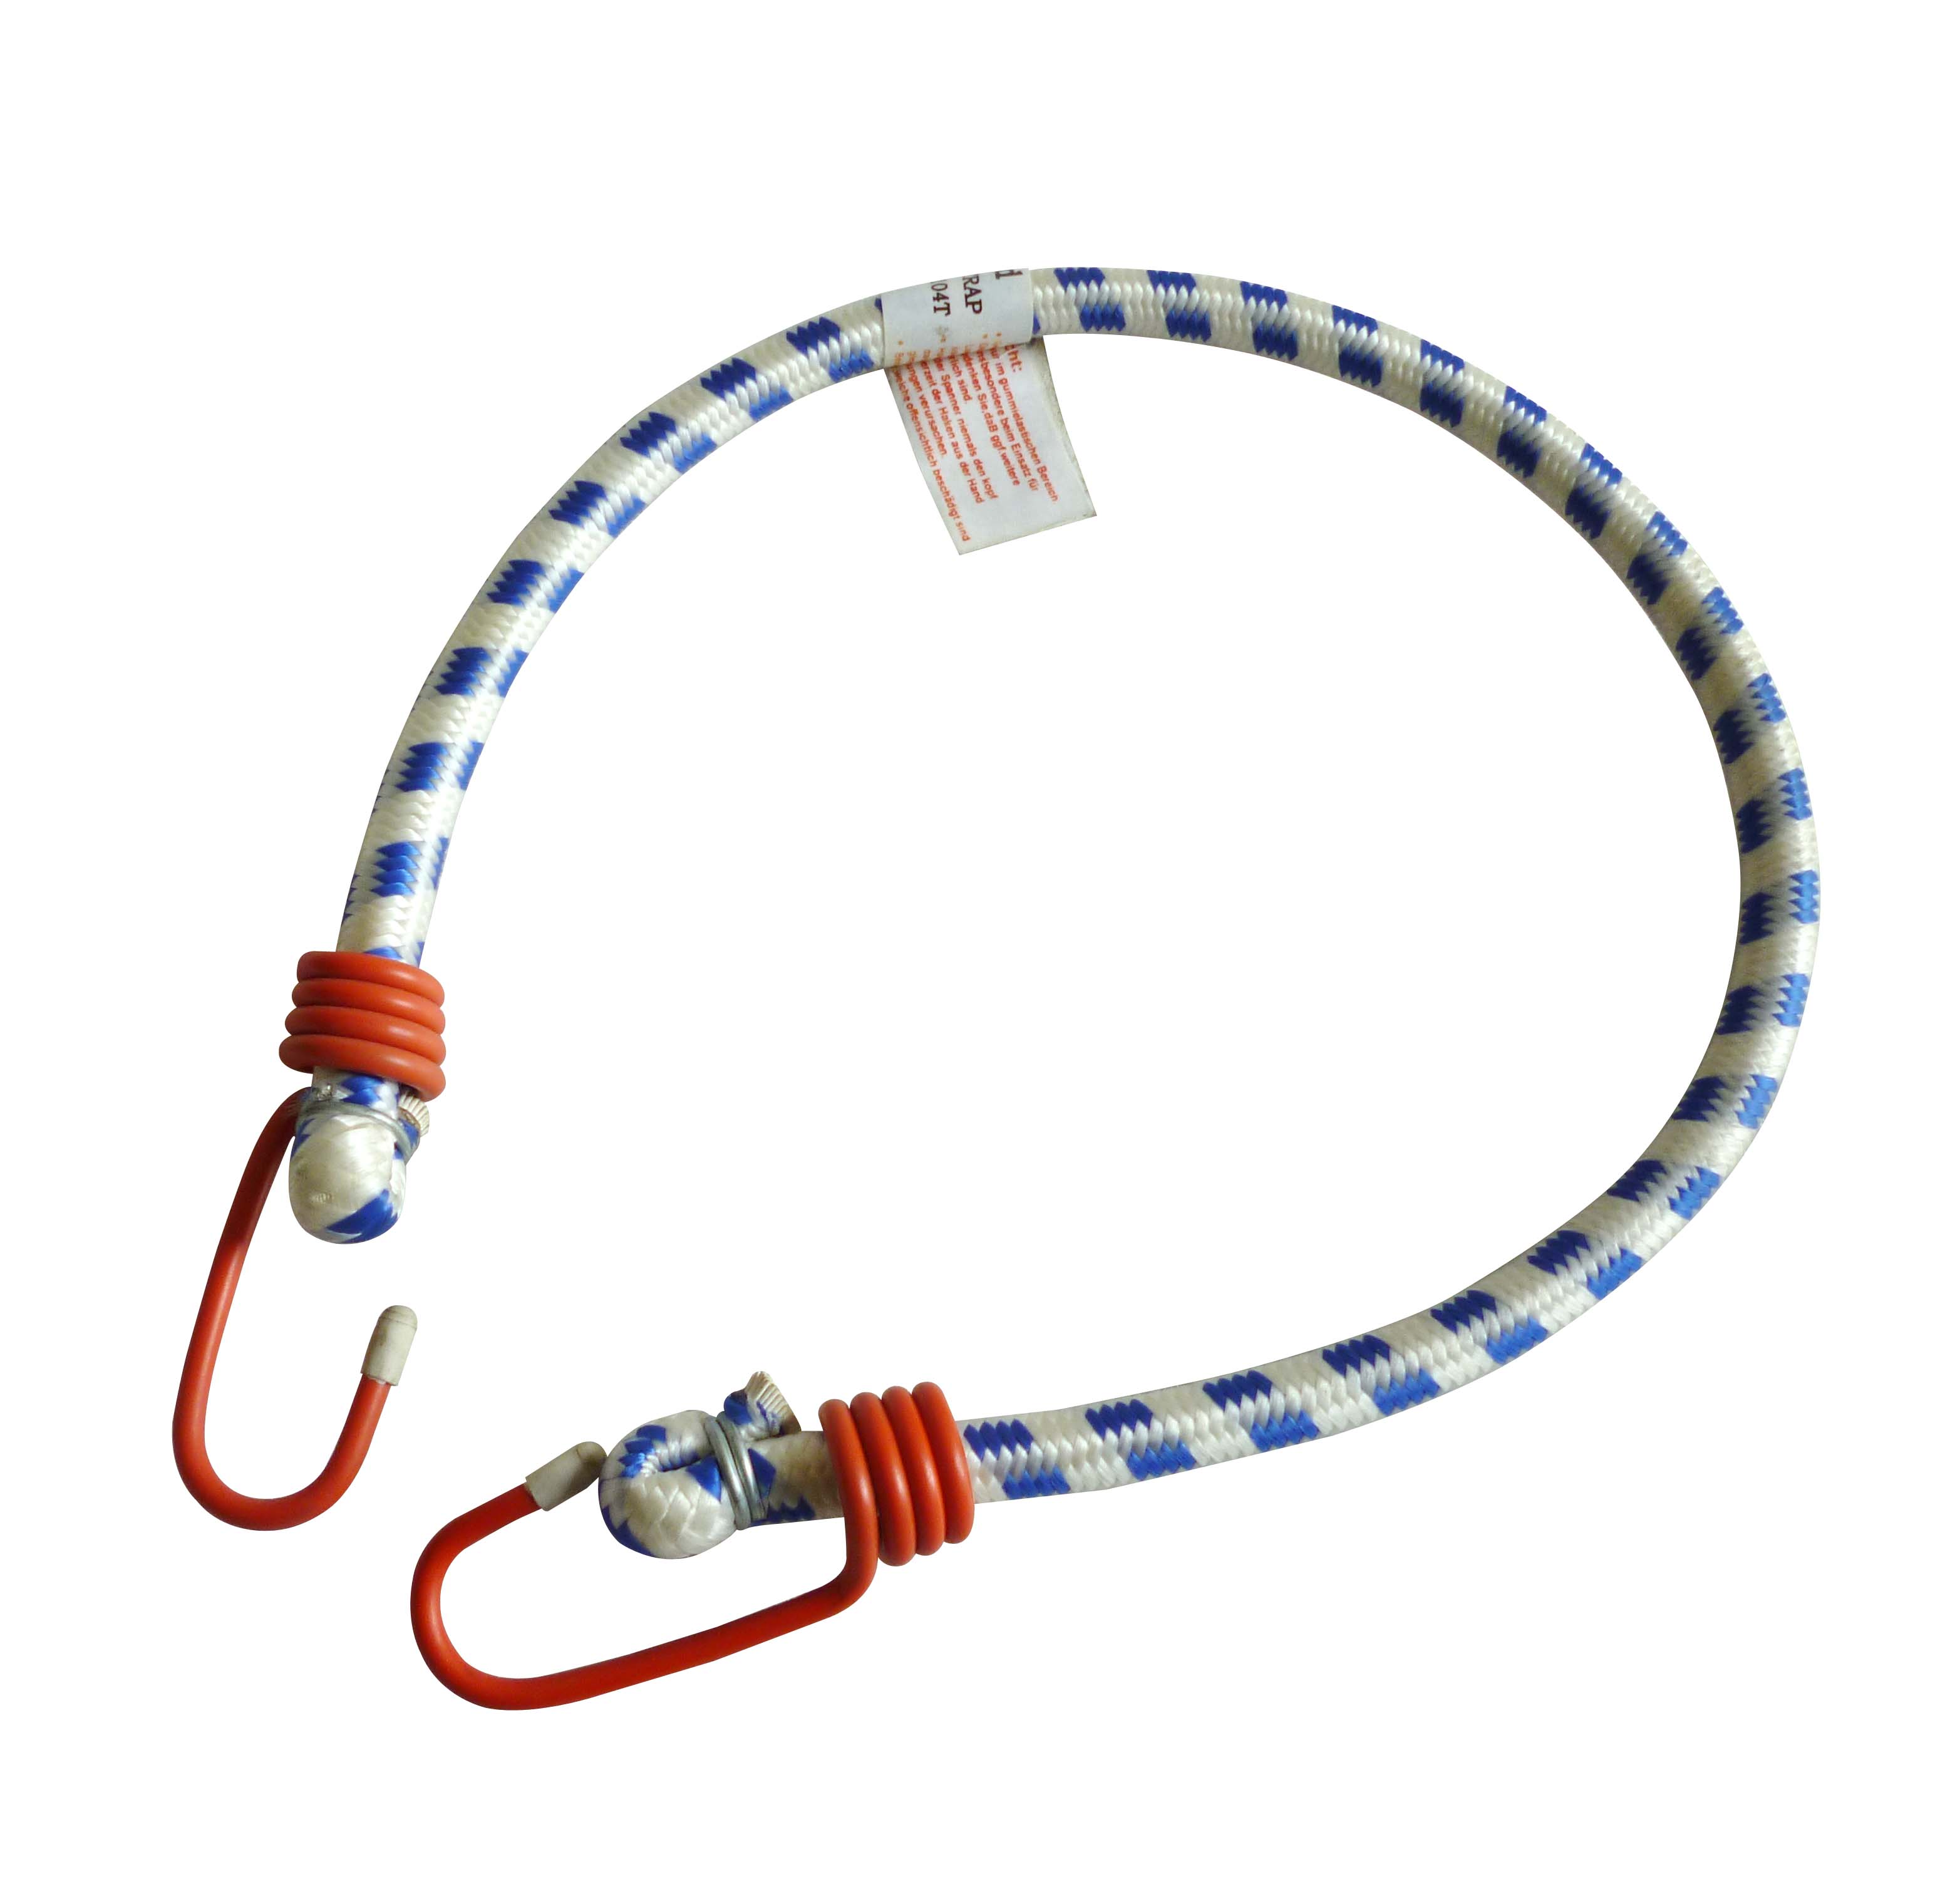 Elastic Cords / Bungee Cords